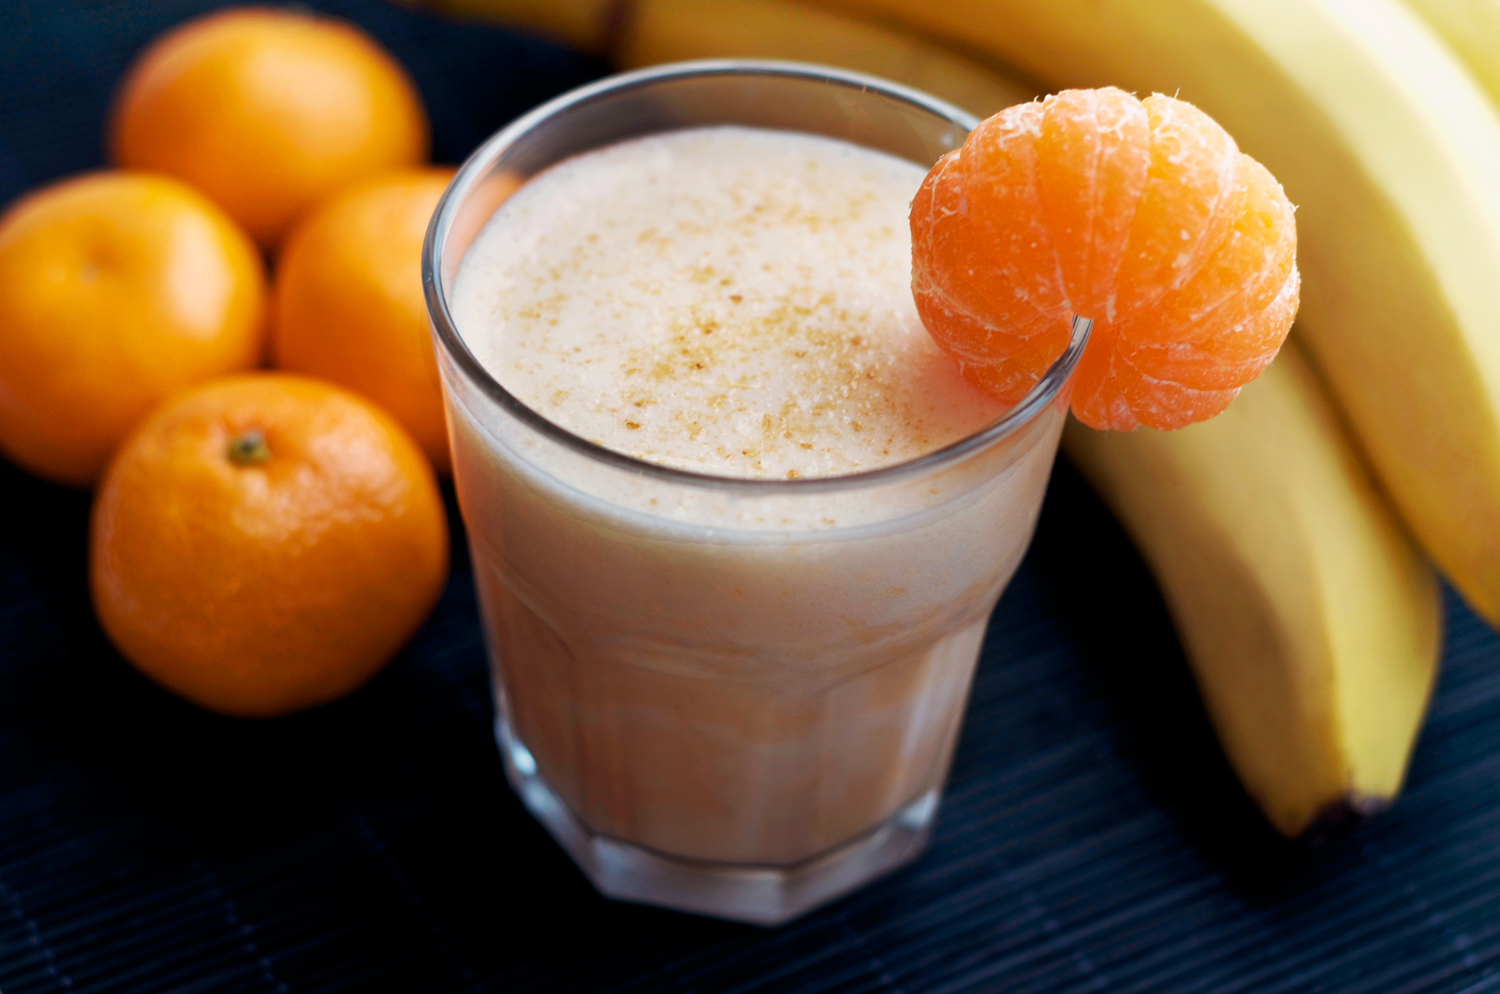 Smoothies of orange with pineapple